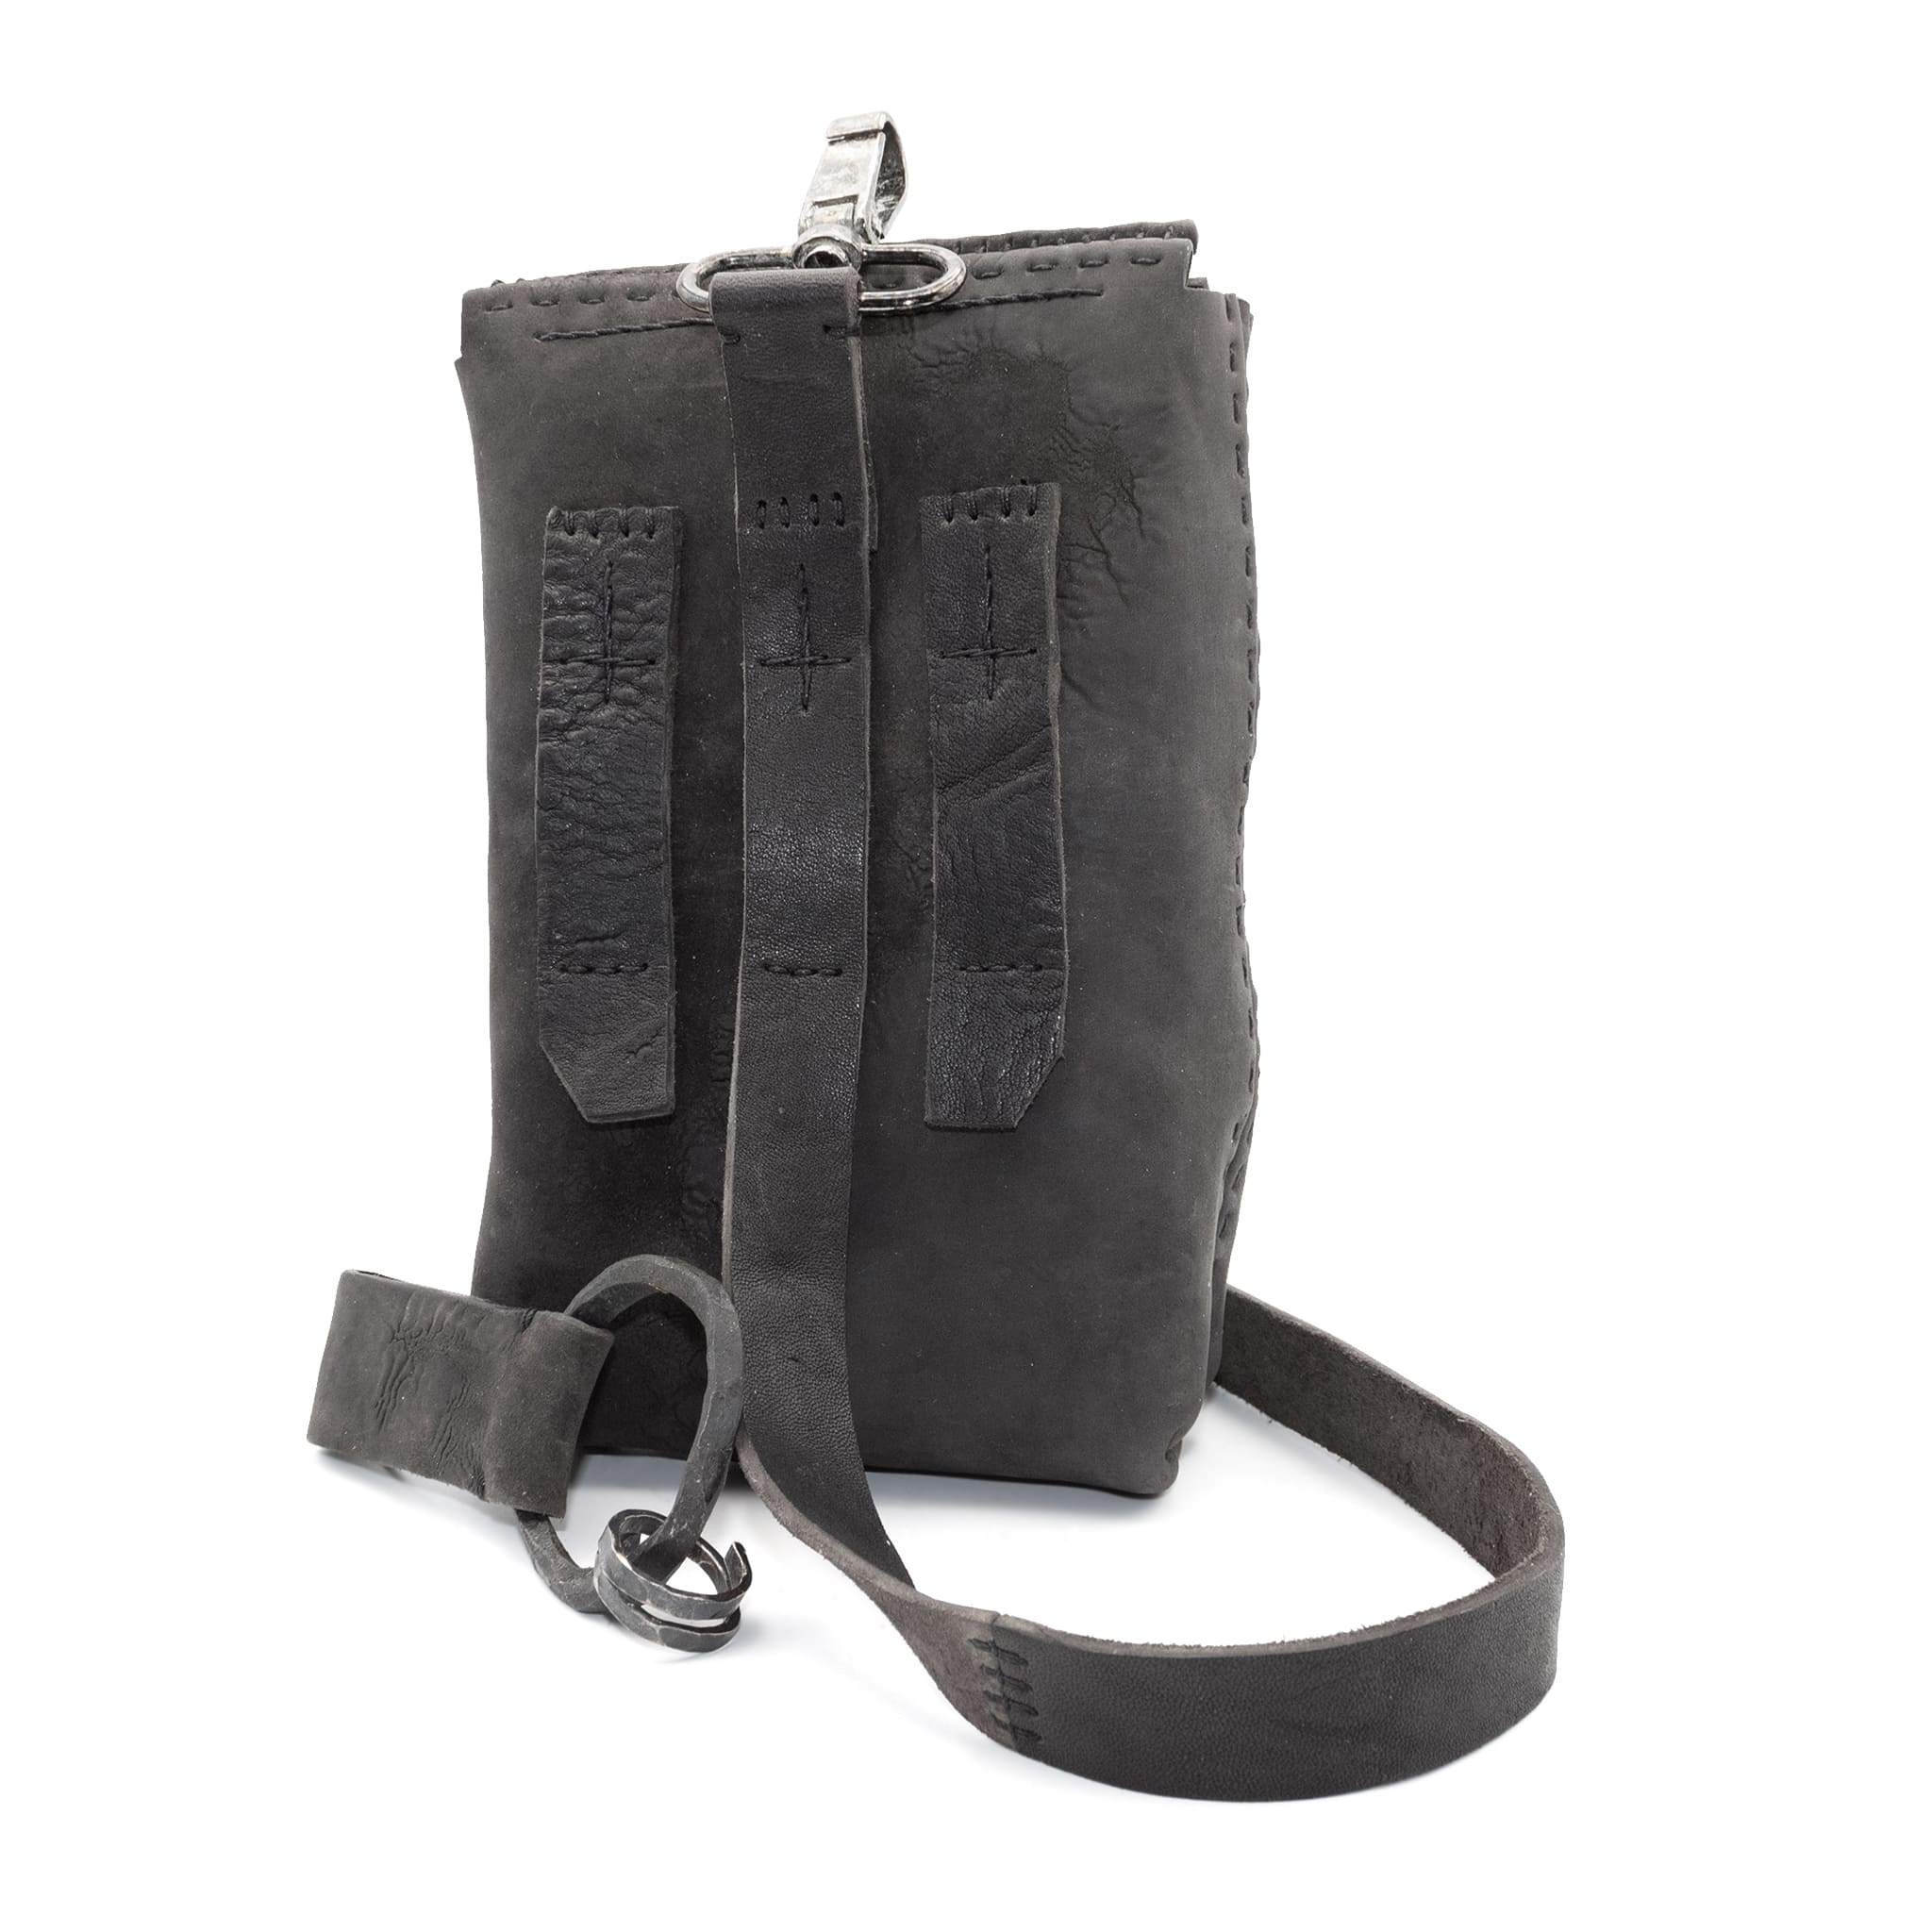 Shop our collection of avant garde hand sewn culatta leather belt bags online at atelierskn.com